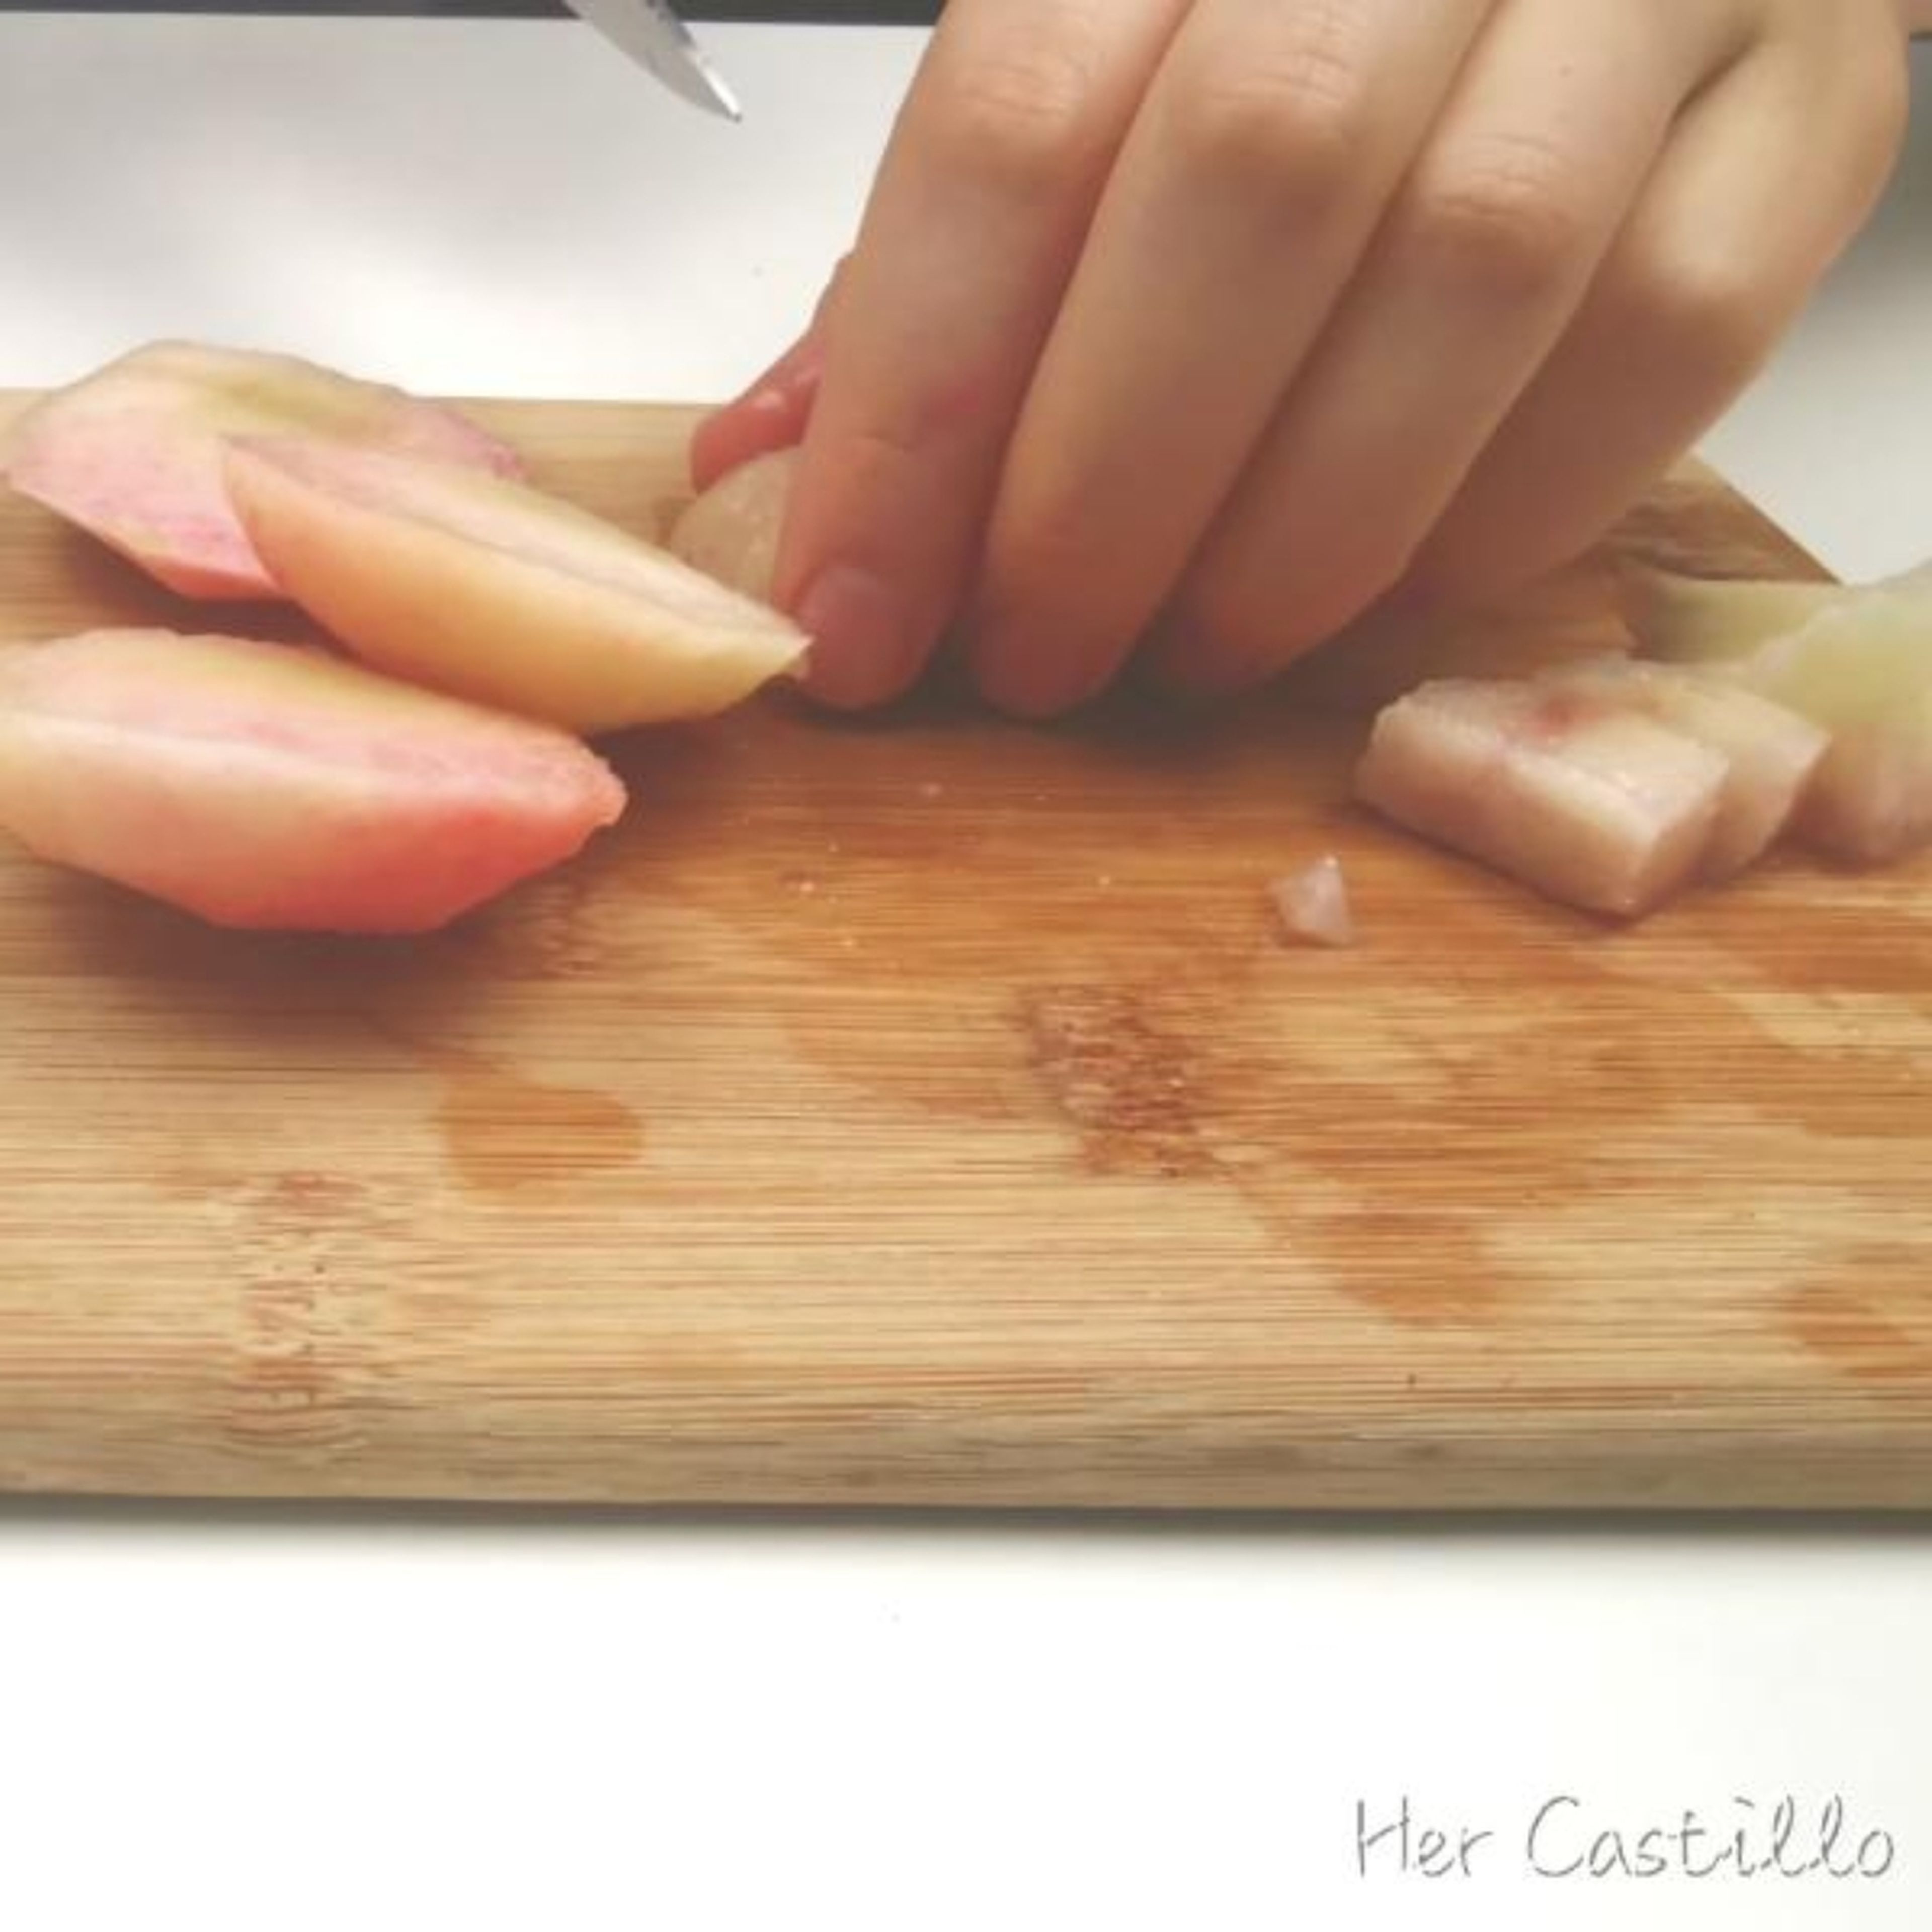 Cut the peaches into small cubes